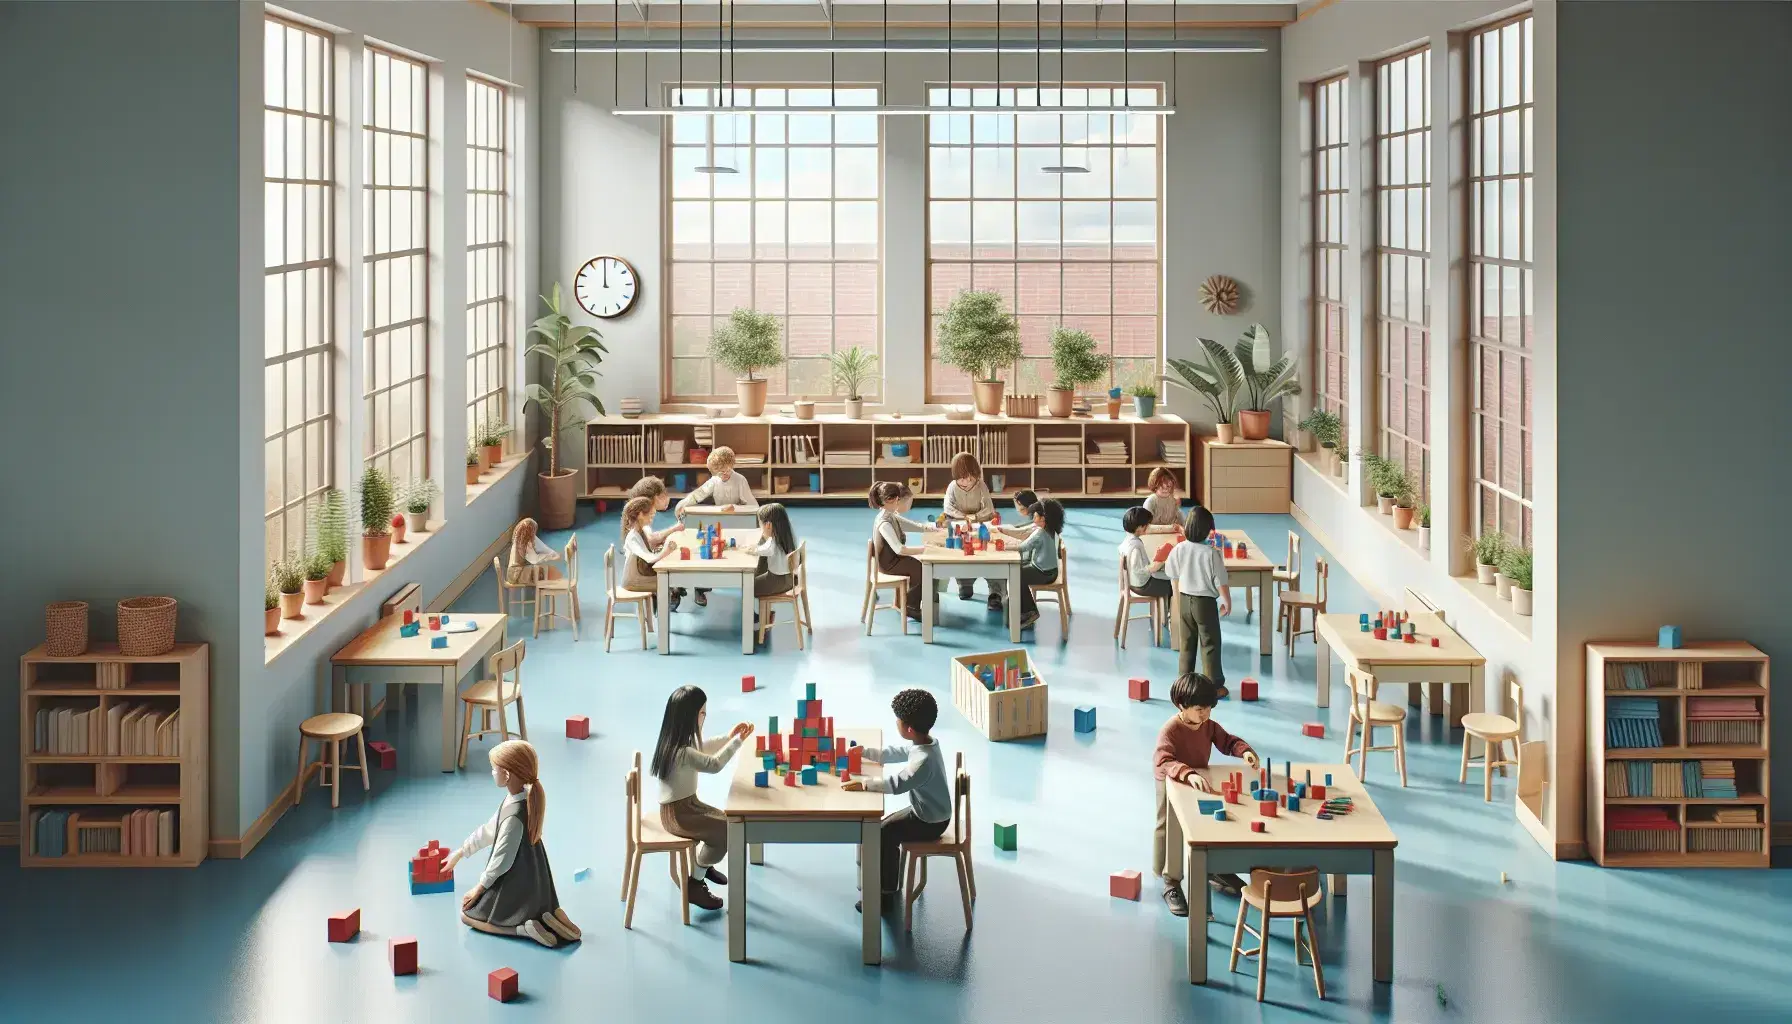 Bright classroom with diverse students using colorful building blocks in a circular desk arrangement, surrounded by green plants and natural light.